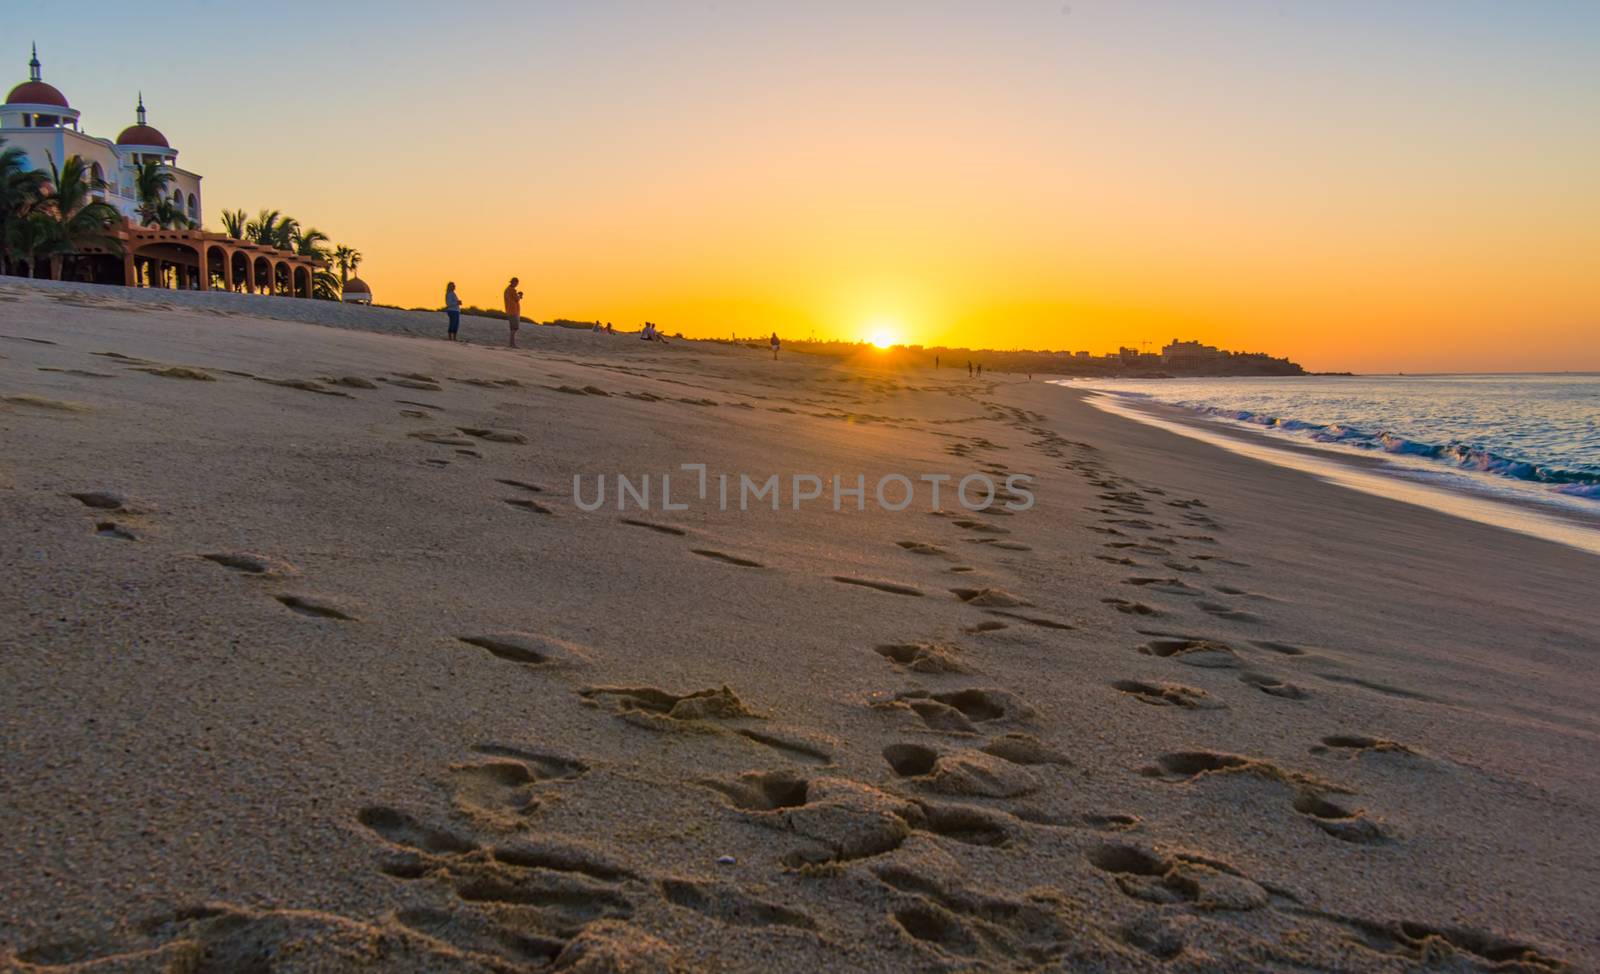 Footsteps in sand on beach at sunrise by JamesWheeler